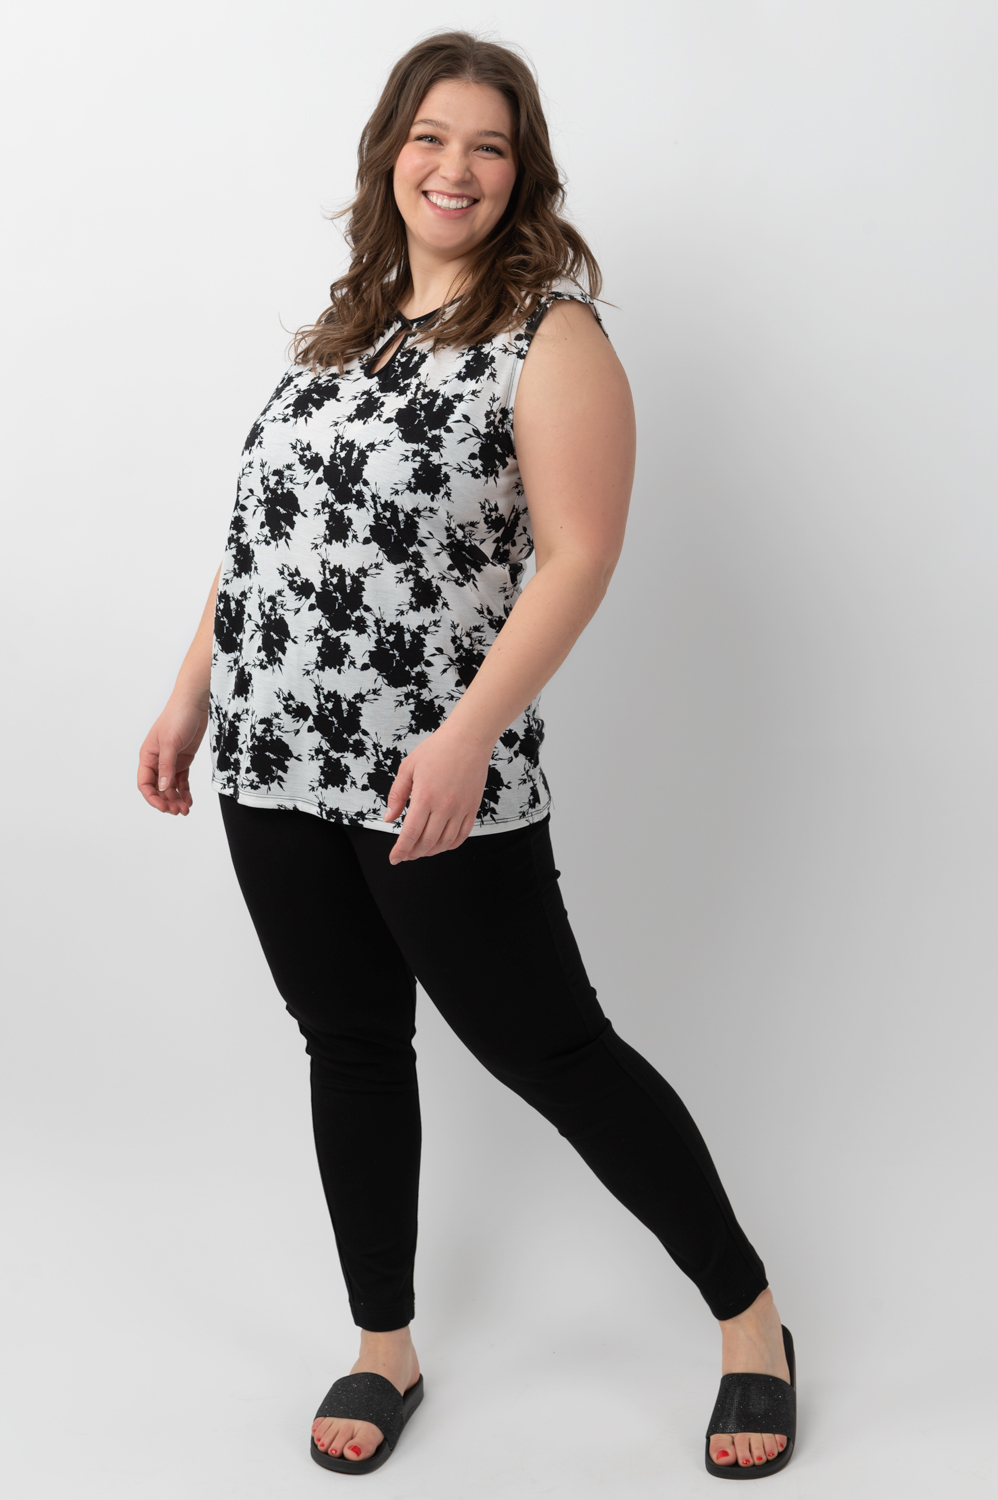 Sleeveless knit top with keyhole neckline - Floral blots - Plus Size